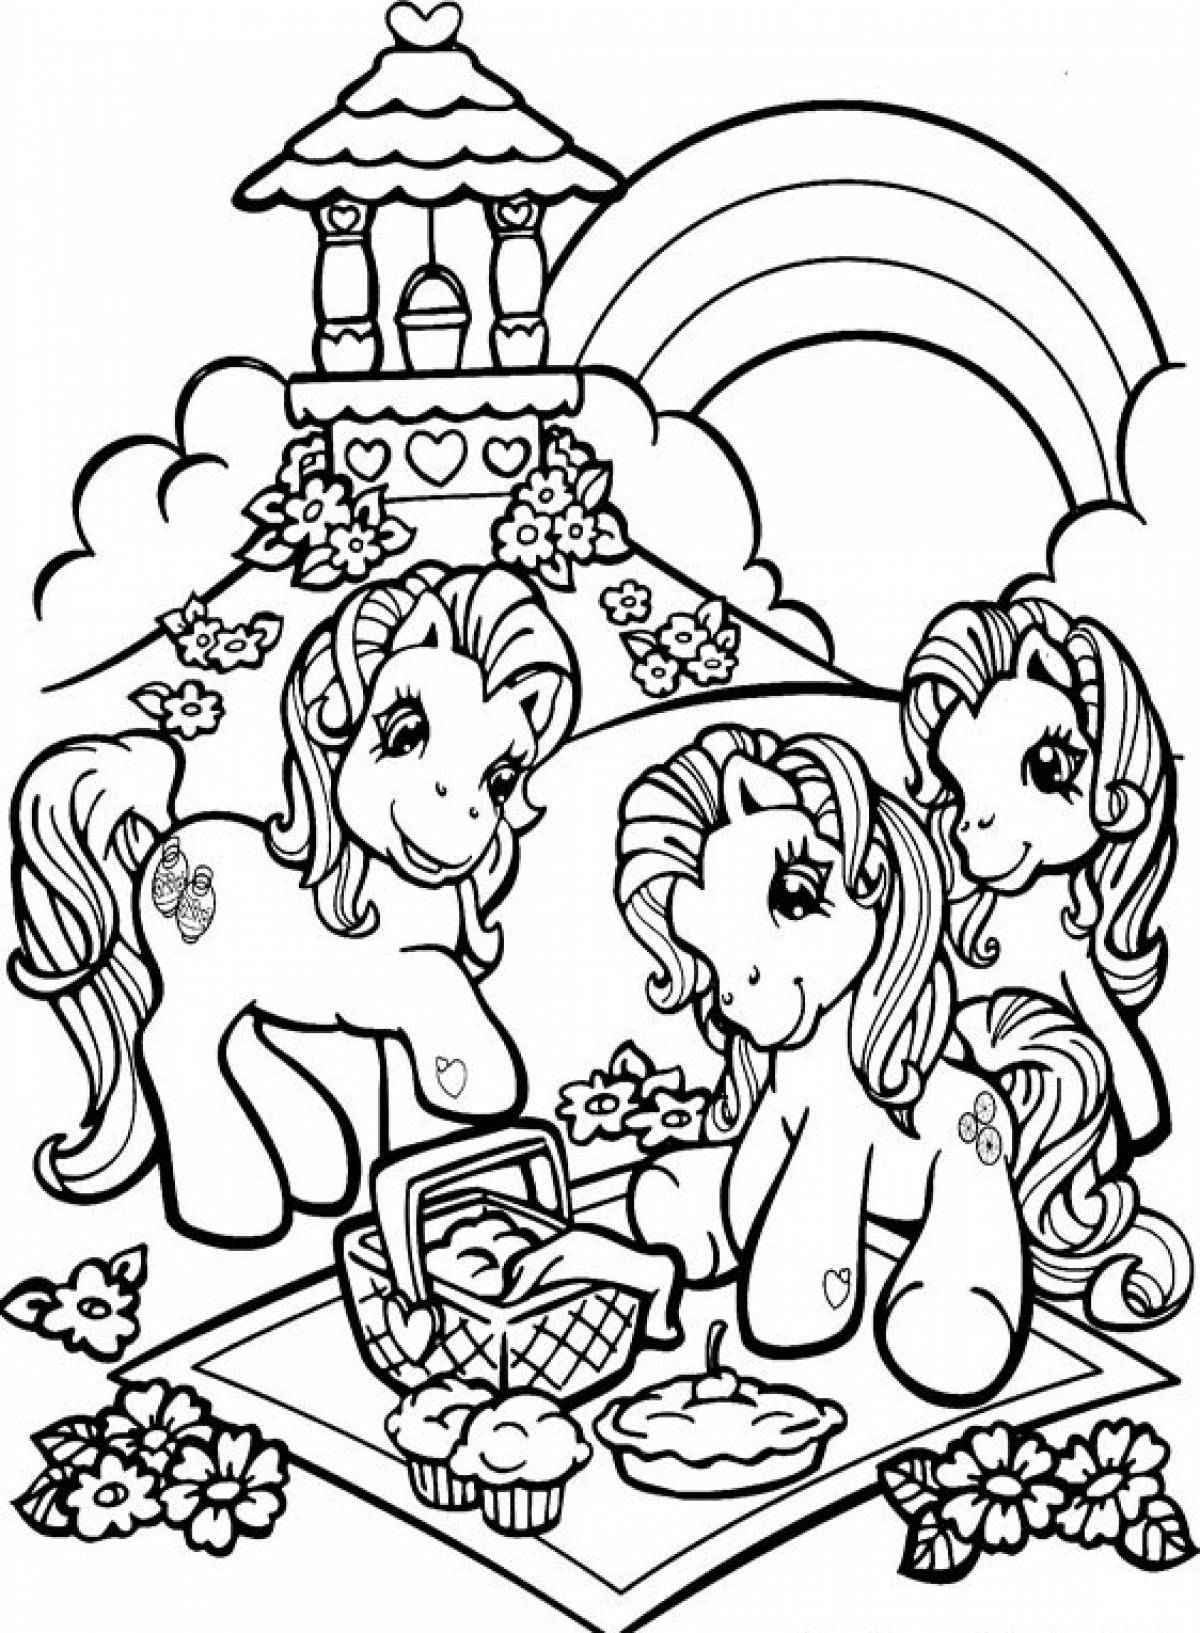 Ponyville coloring pages online for free